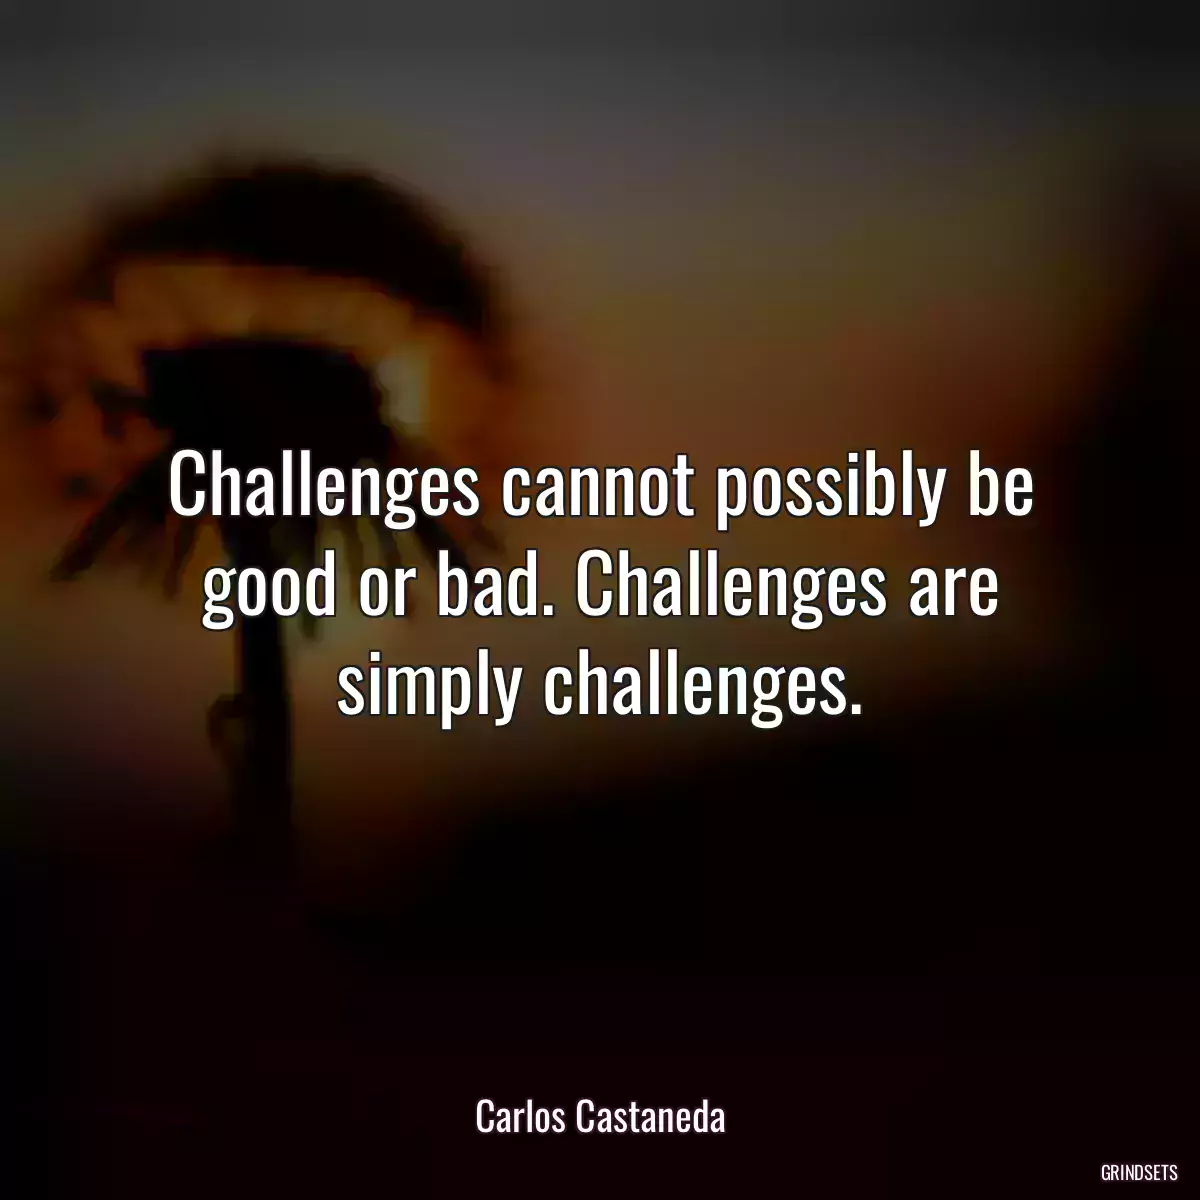 Challenges cannot possibly be good or bad. Challenges are simply challenges.